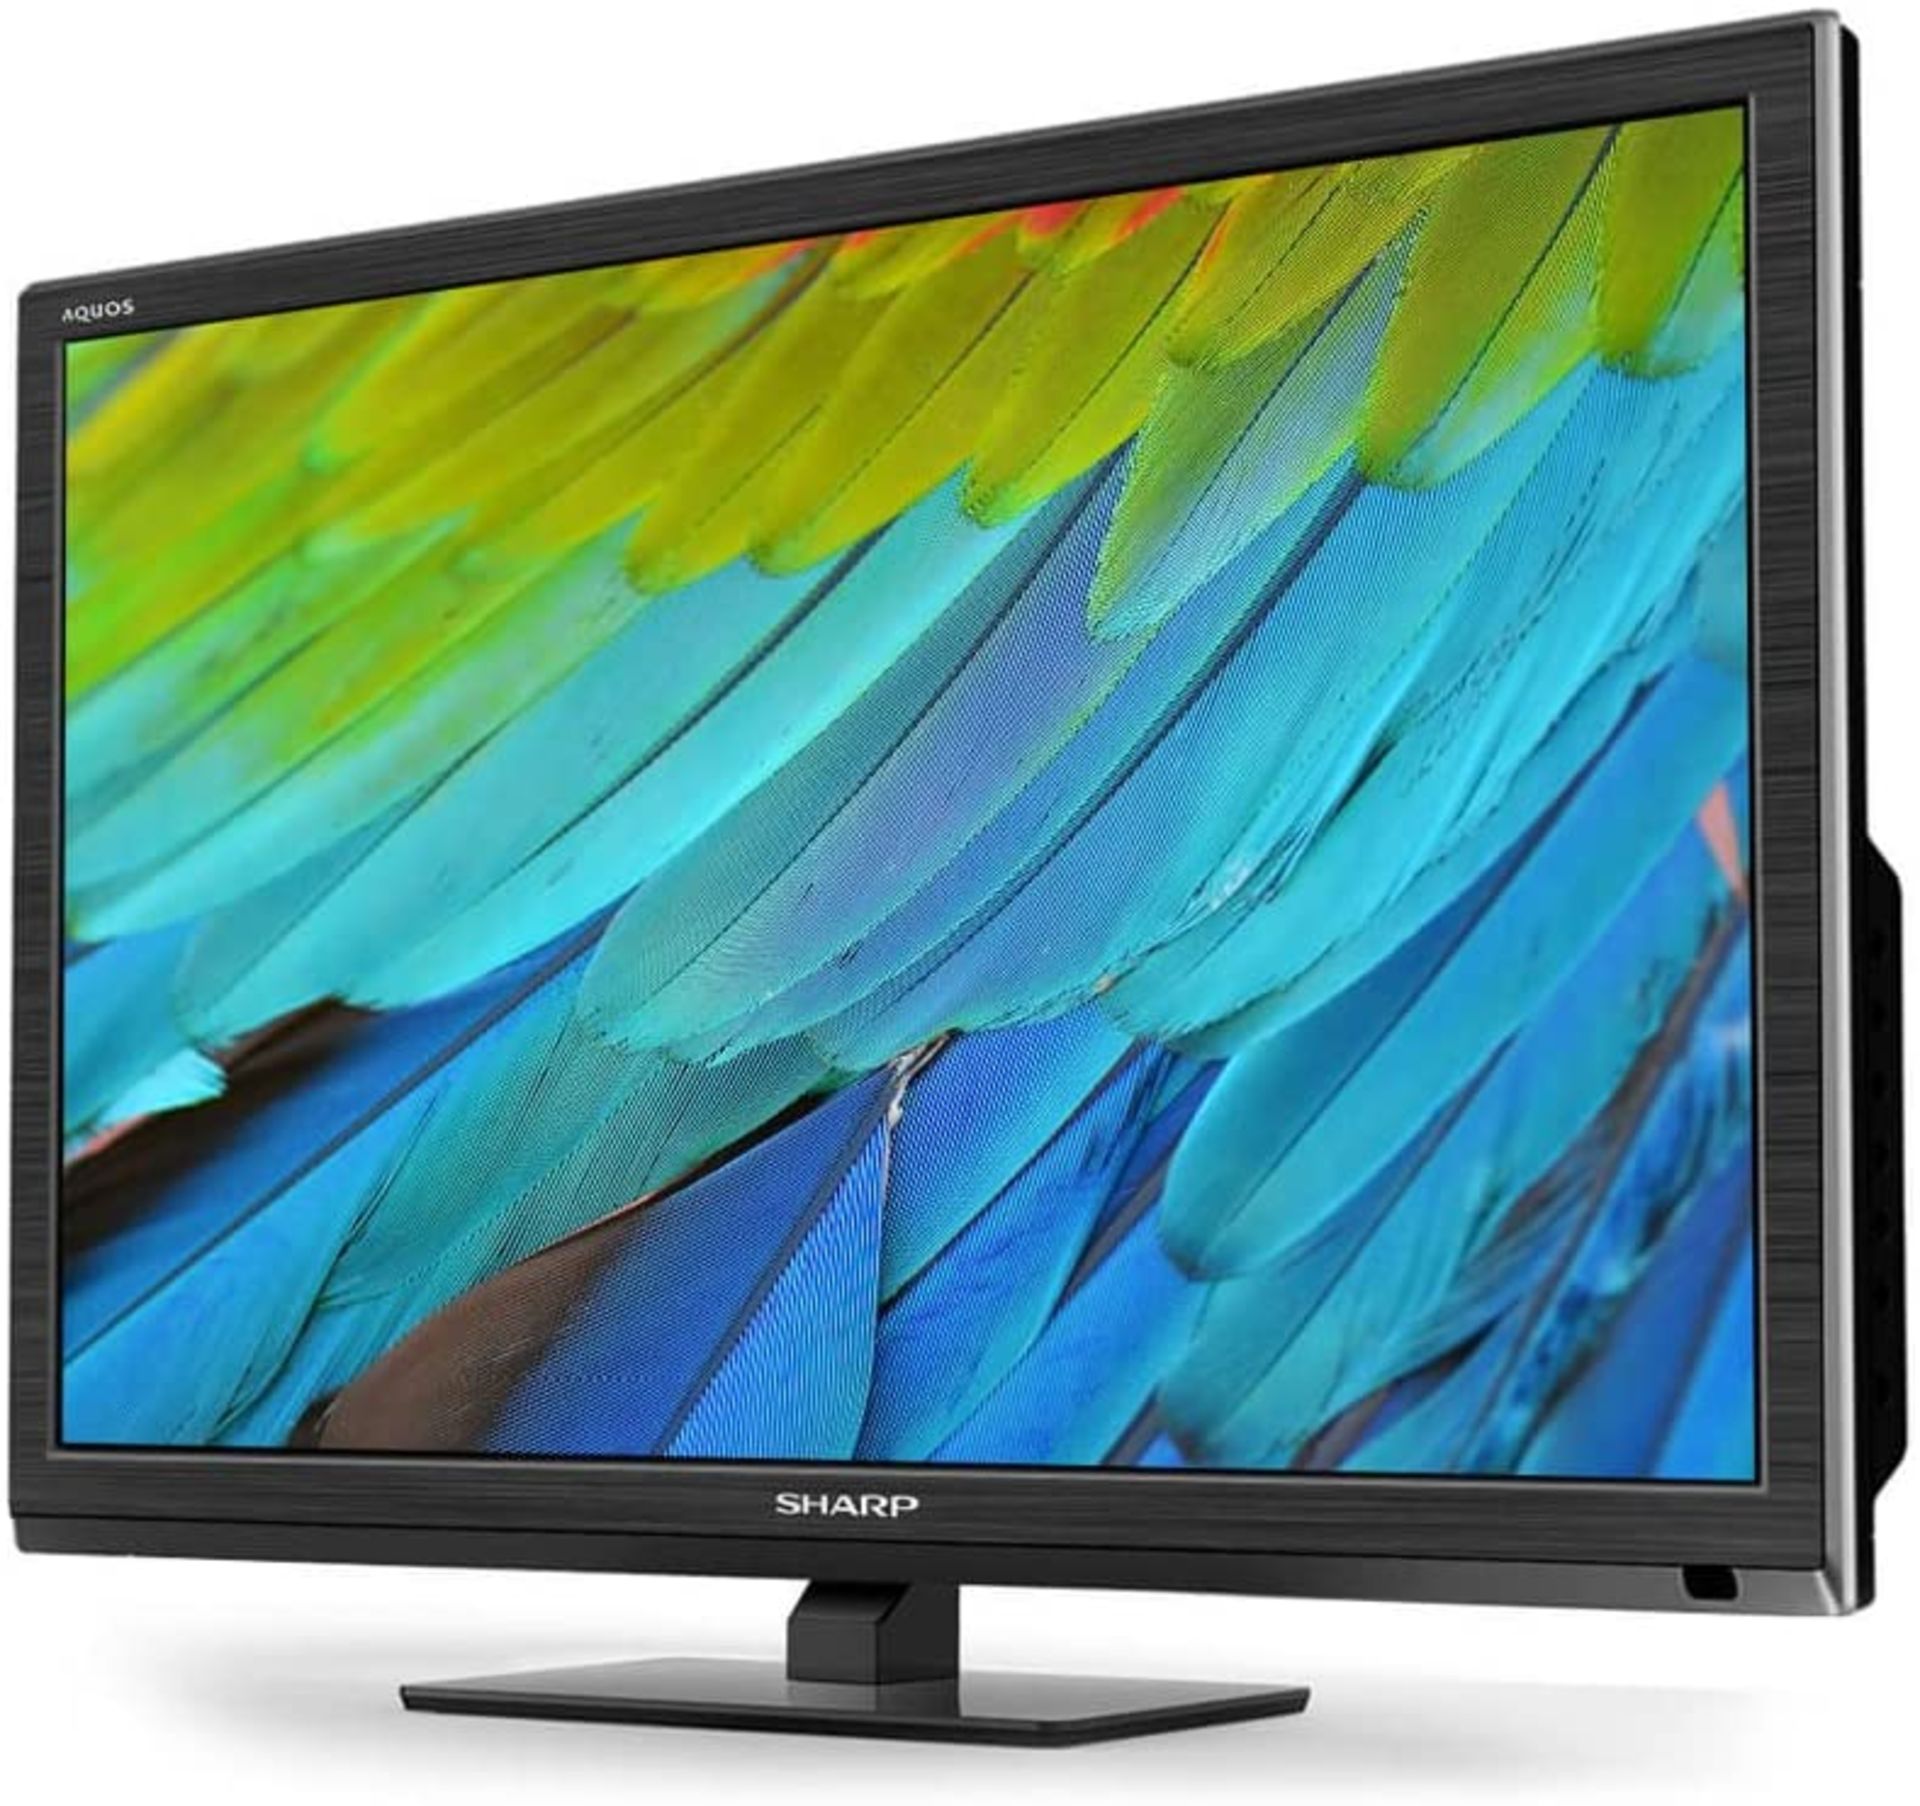 (12) 1 x Grade B - Sharp LC-22DFE4011K 22-Inch Widescreen 1080p Full HD TV with Freeview and Bu...